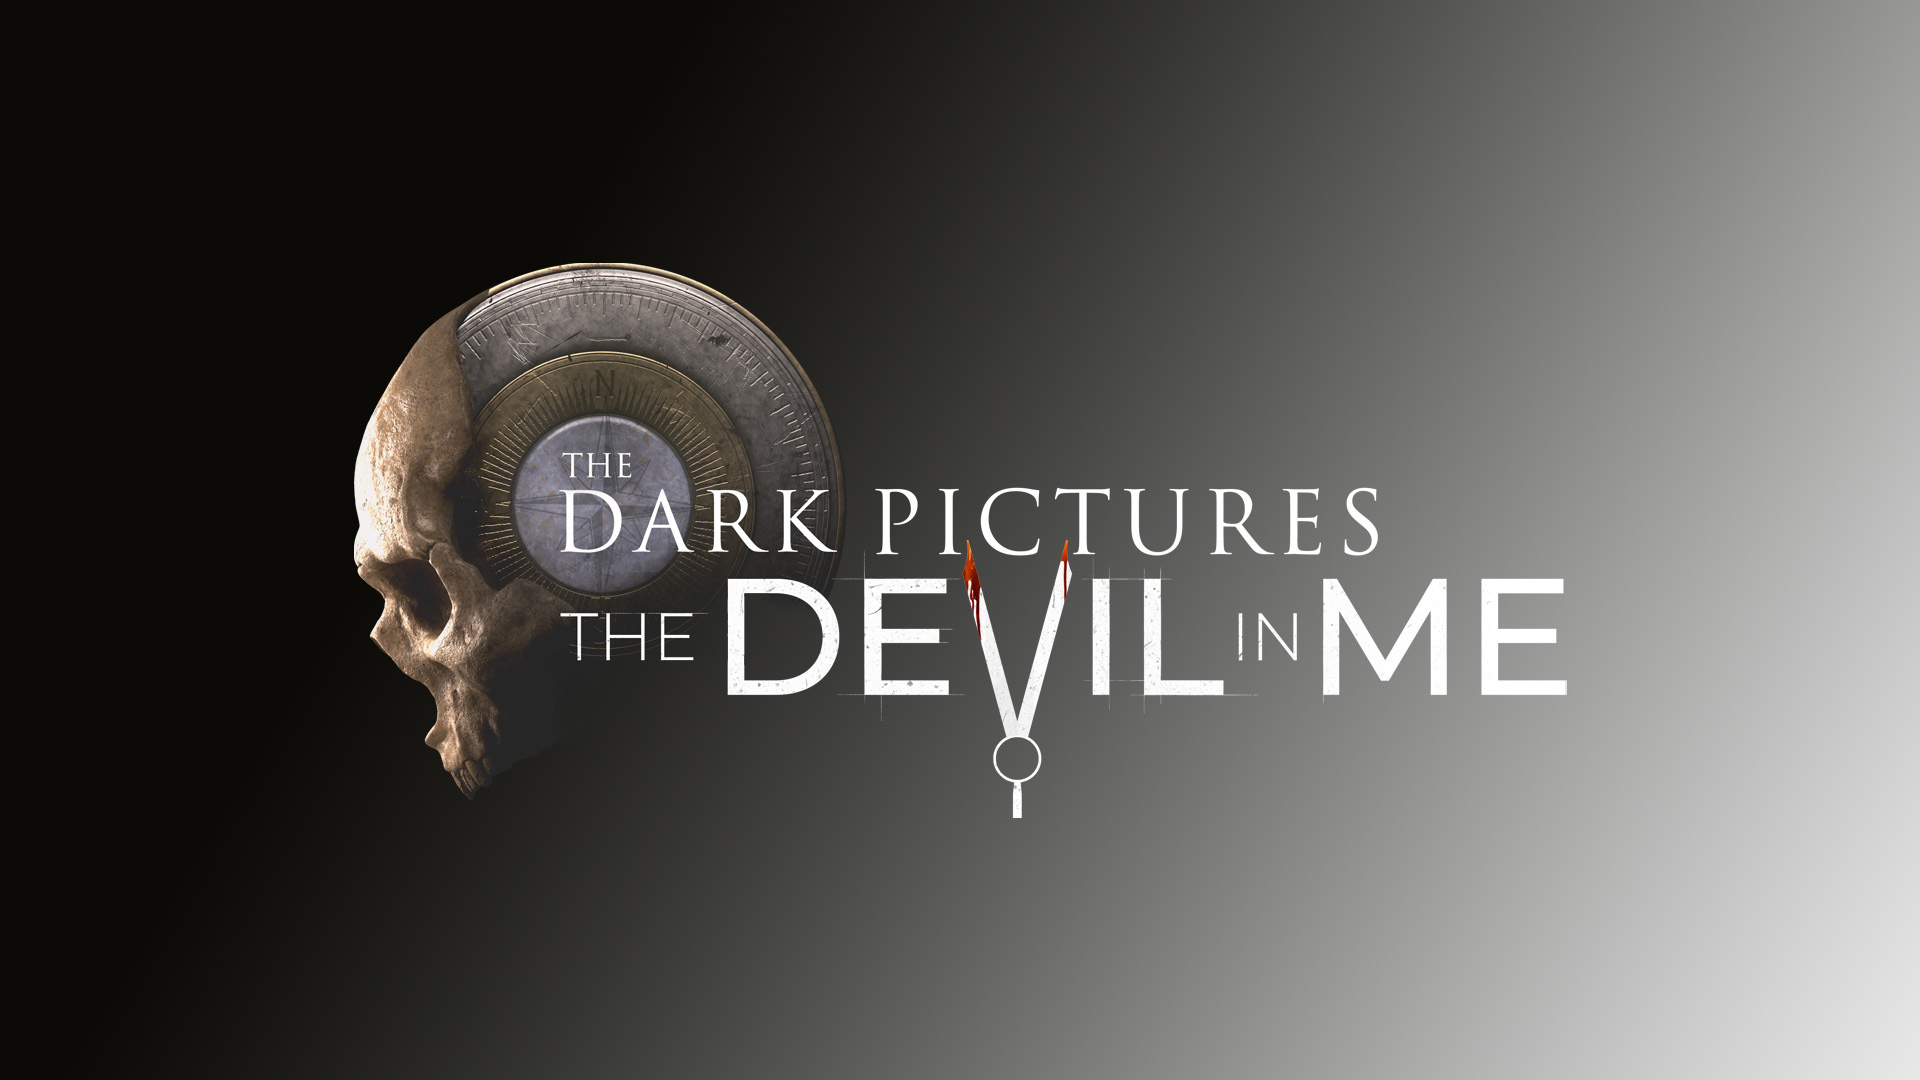 The Dark Pictures: The Devil in Me: Survival horror computer game based on the America's first serial killer. 1920x1080 Full HD Wallpaper.